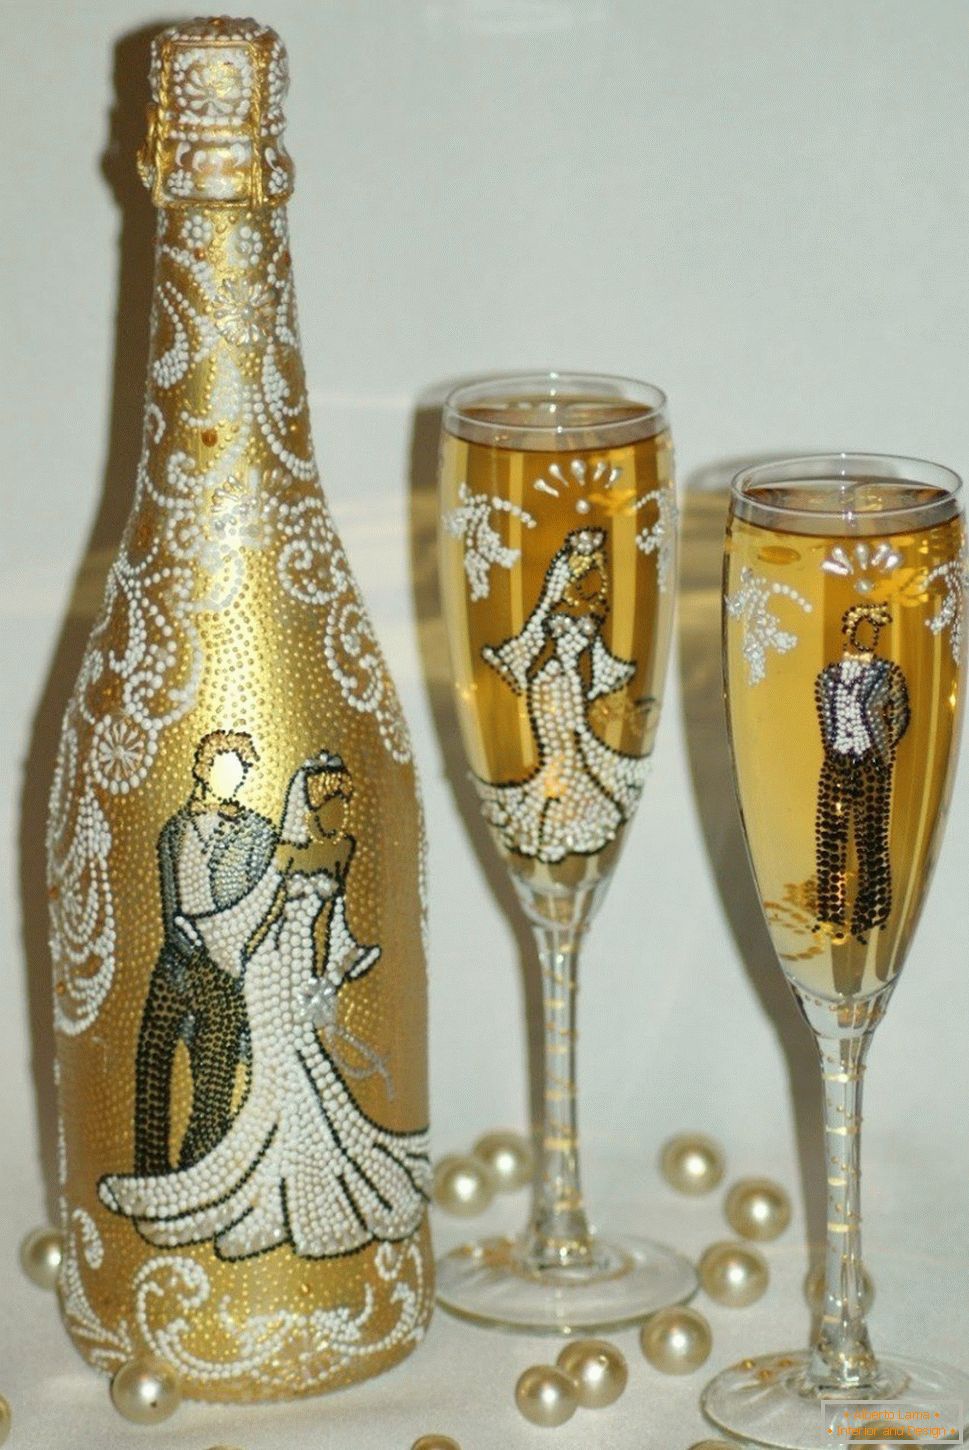 Couple on a bottle and glasses